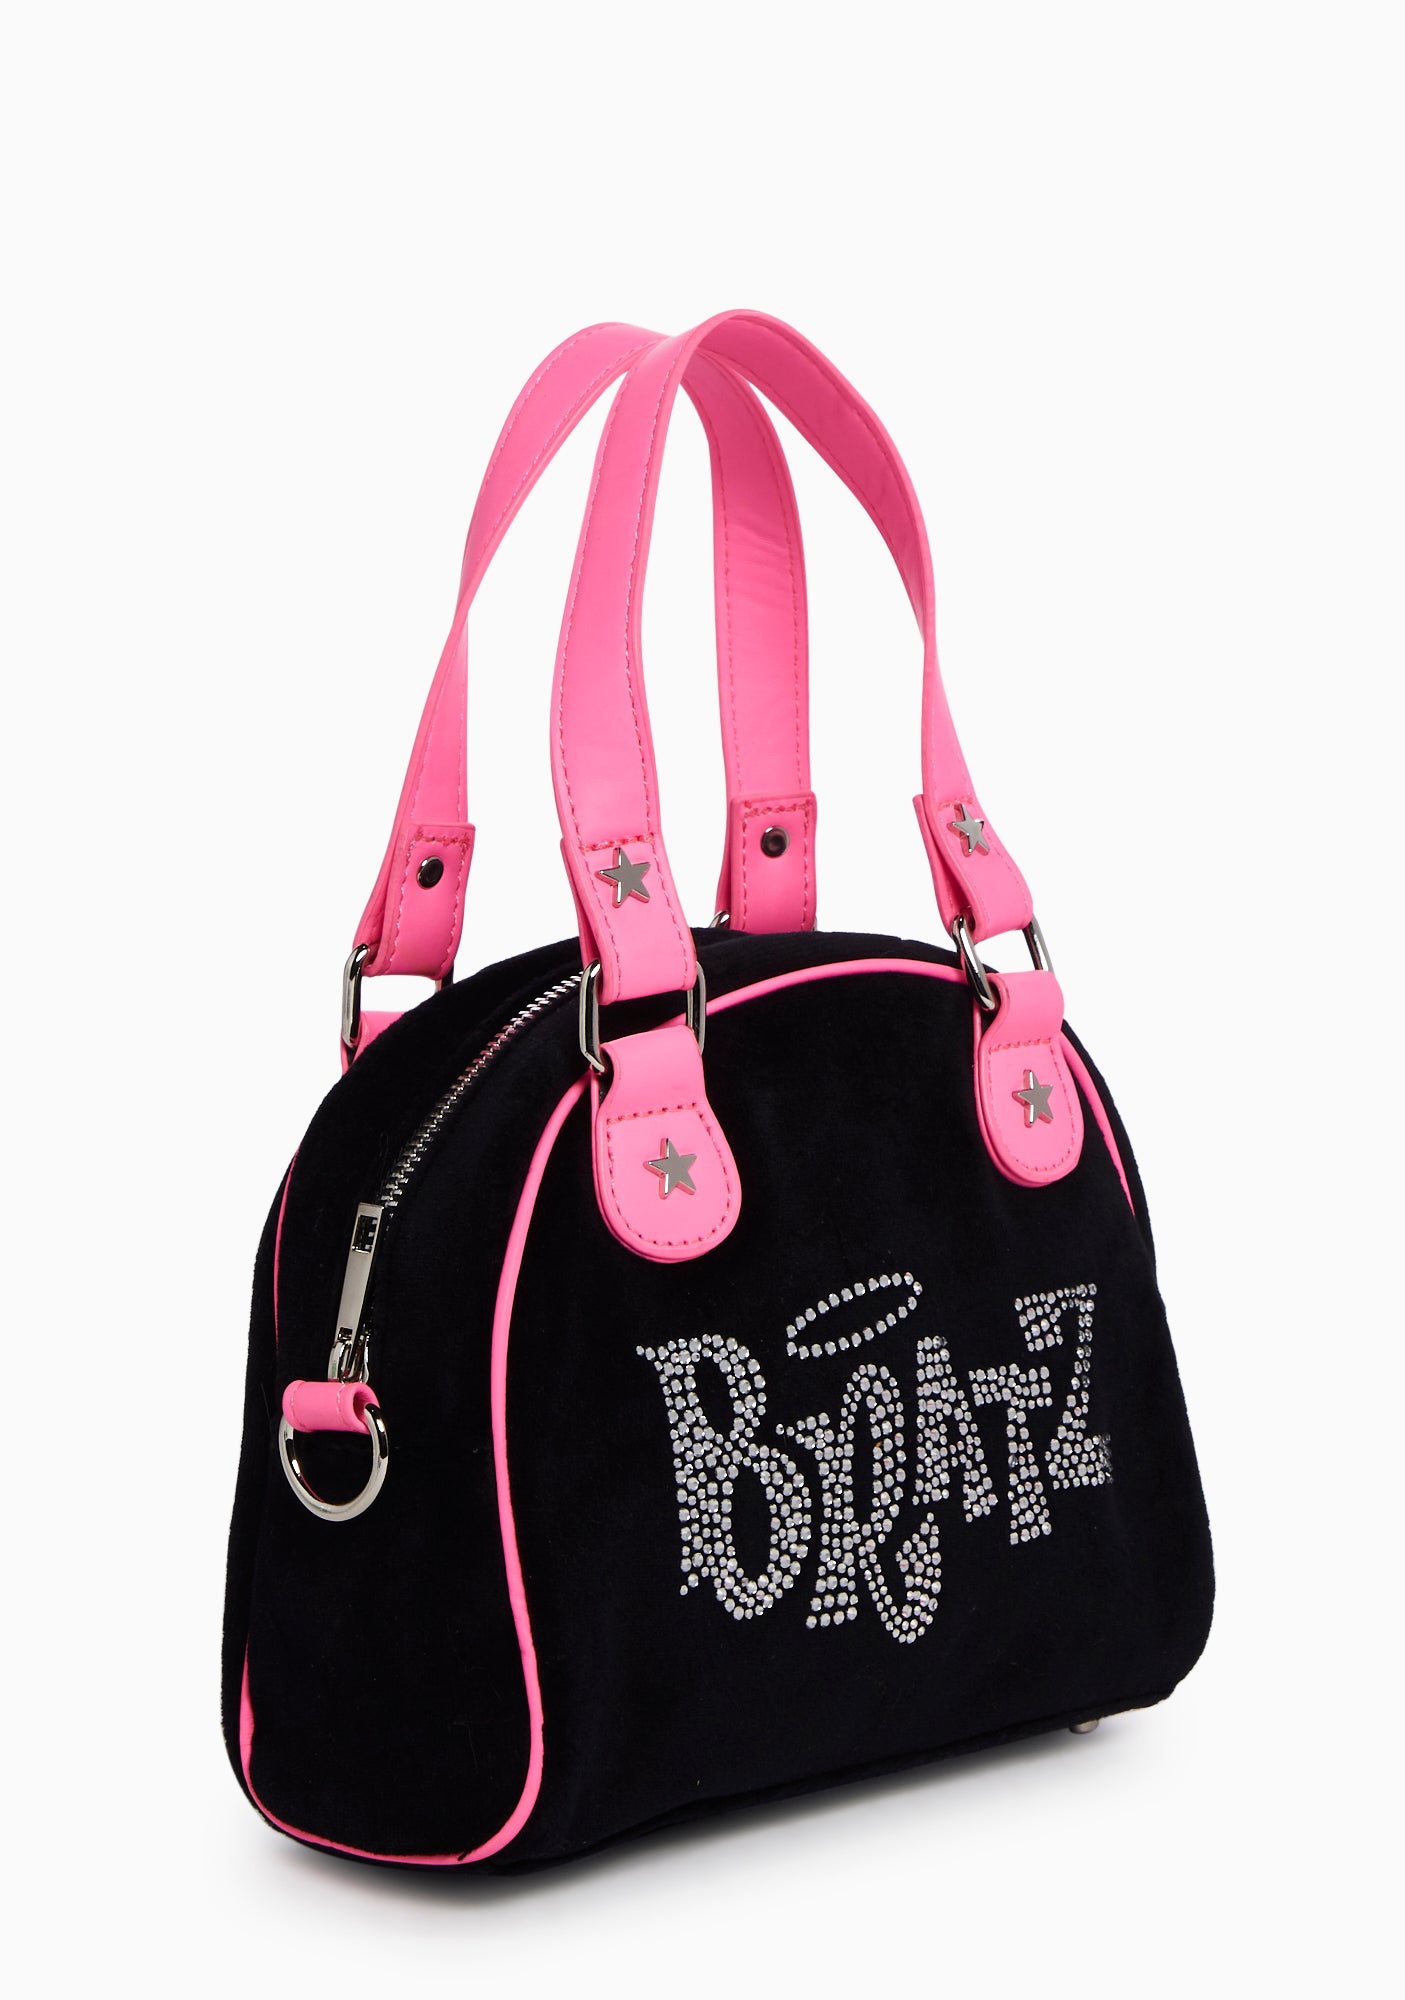 Bratz bag, Do not purchase, looking for offers